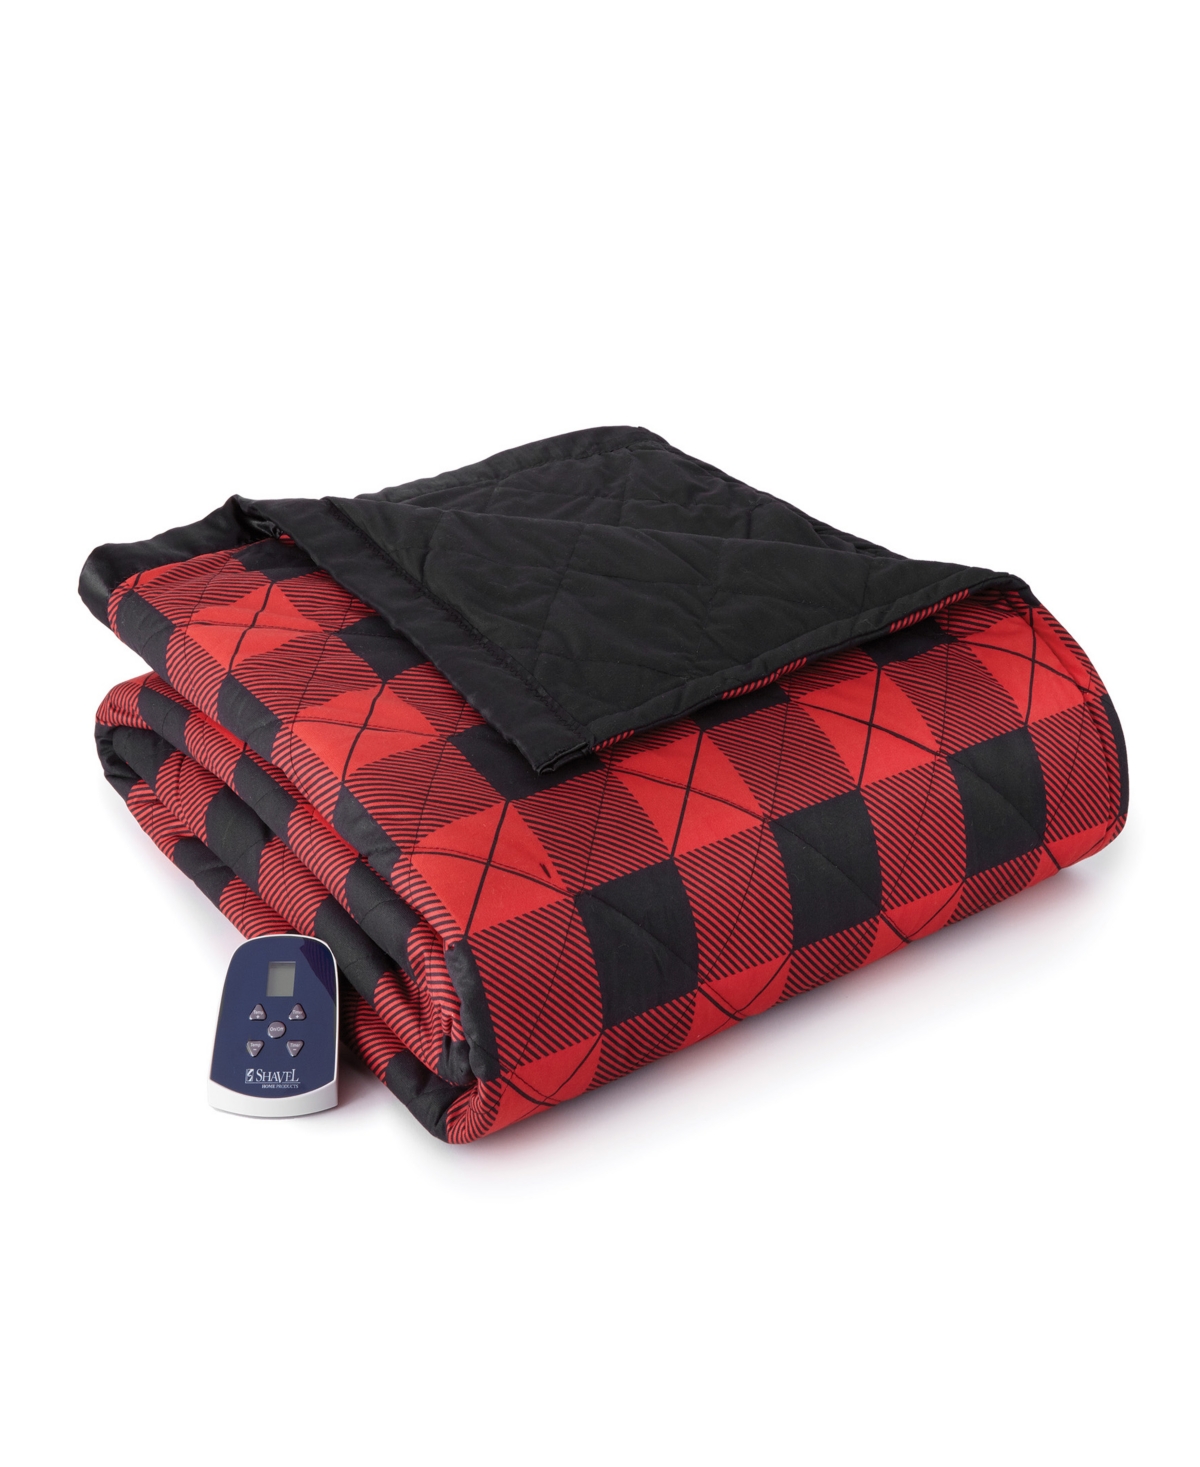 Shavel Micro Flannel 7 Layers Of Warmth Full Electric Blanket In Buffalo Check Red